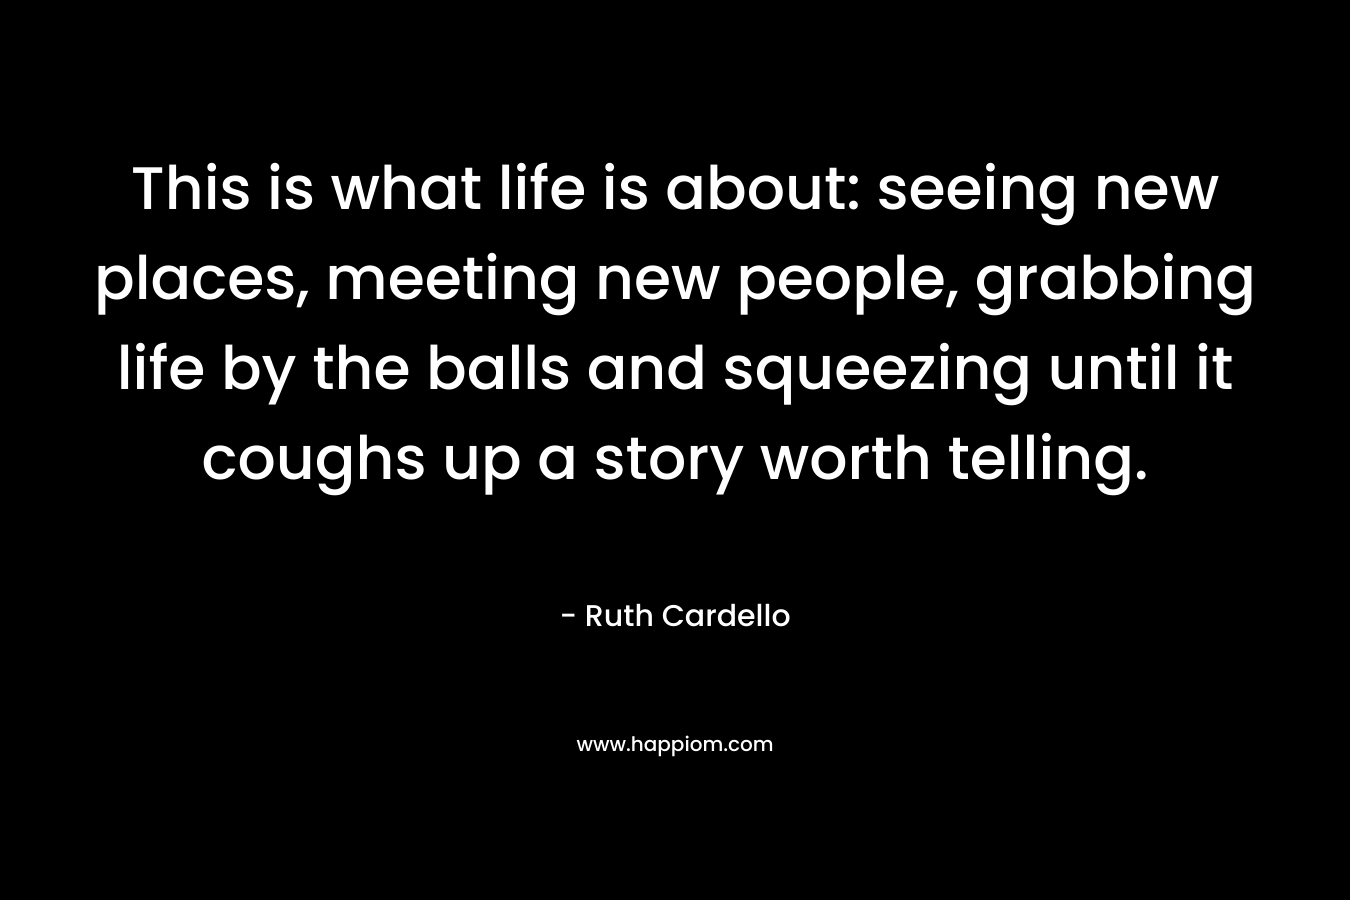 This is what life is about: seeing new places, meeting new people, grabbing life by the balls and squeezing until it coughs up a story worth telling. – Ruth Cardello